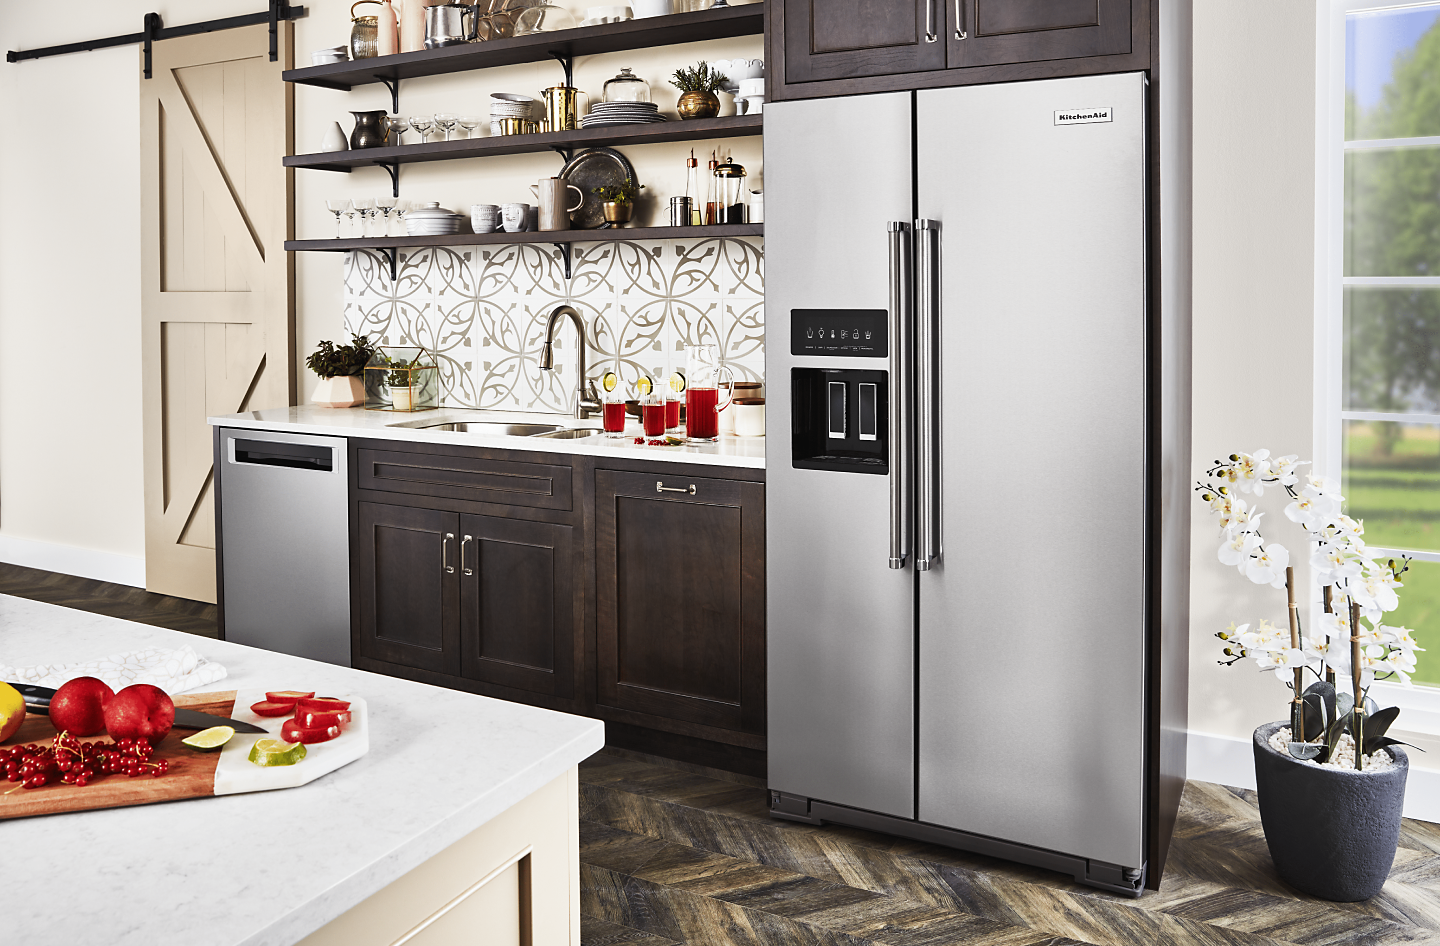 Stainless steel KitchenAid® side-by-side refrigerator next to kitchen sink countertop